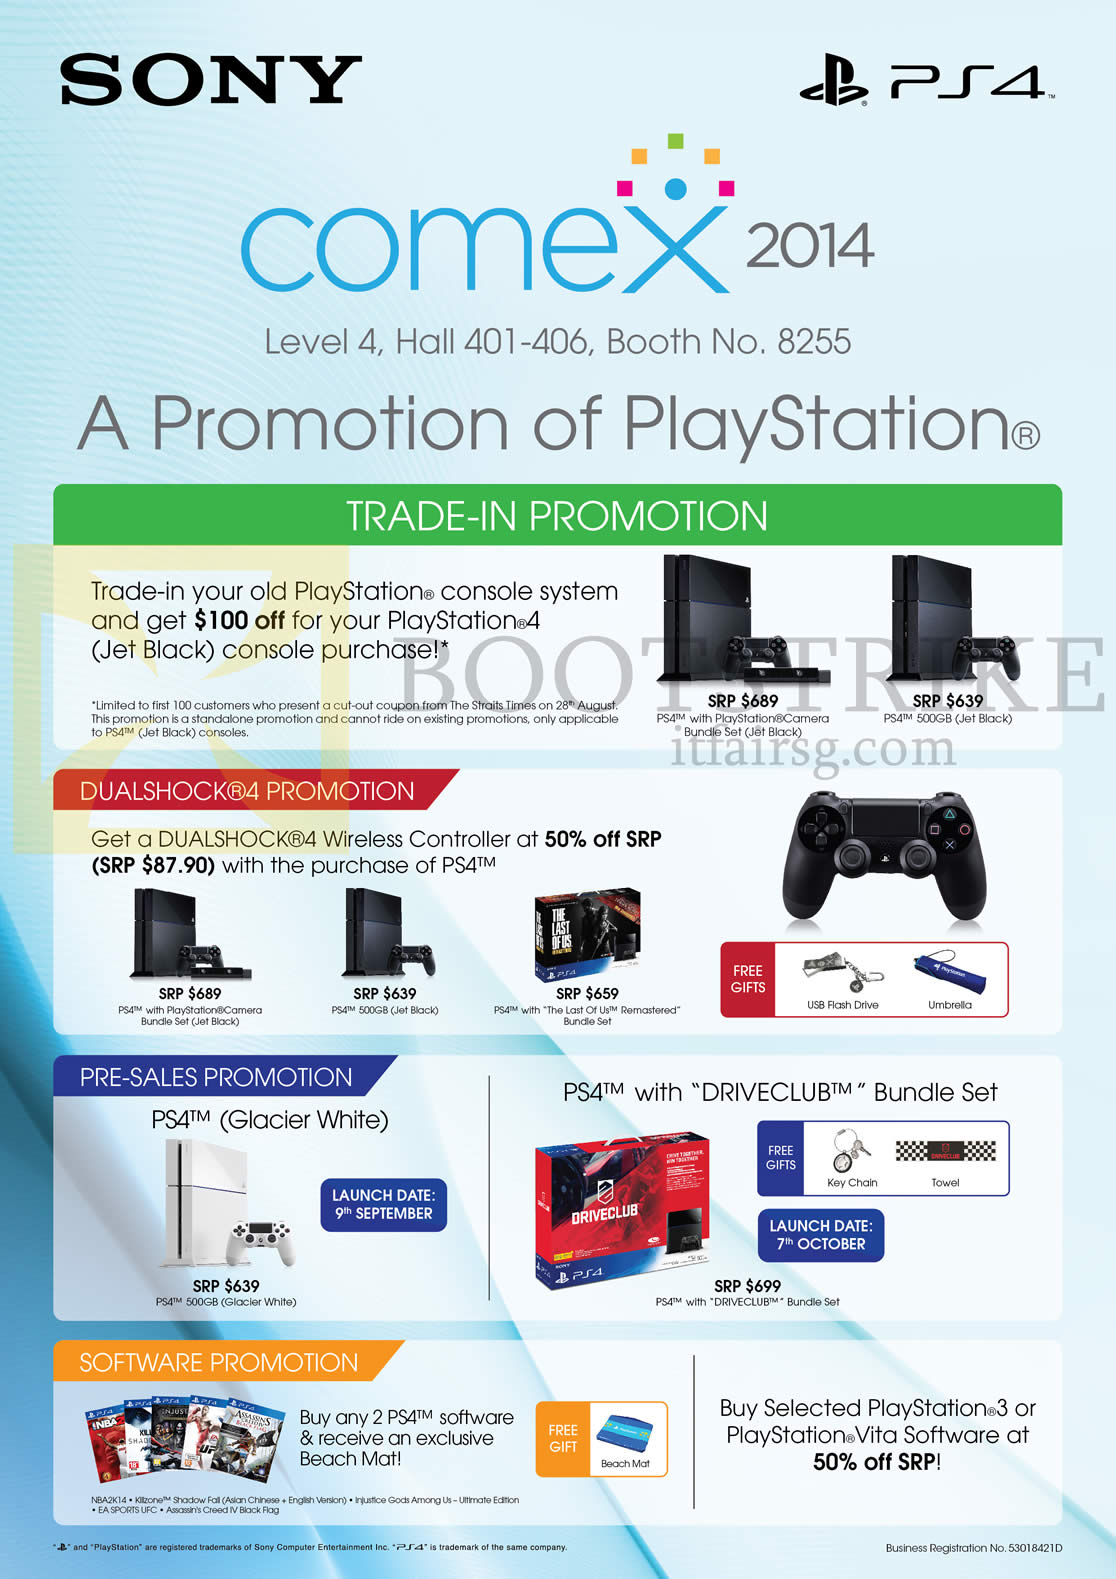 COMEX 2014 price list image brochure of Sony PlayStation 4 PS4, Trade-In, Dualshock Wireless Controller, Glacier White Pre-Order, Games